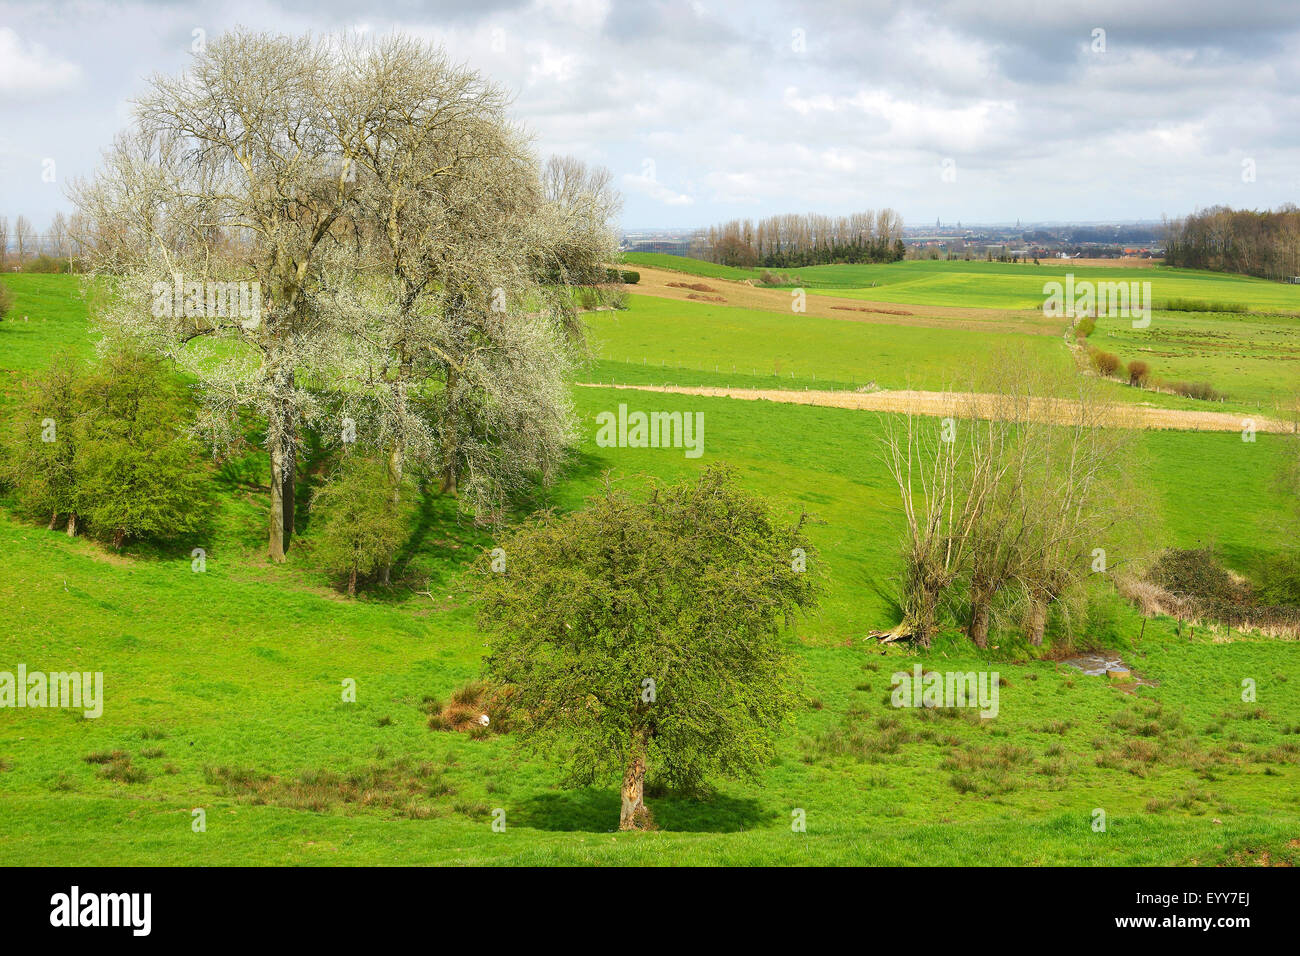 Bocage landscape with hedges and trees, Belgium, Scherpenberg Stock Photo